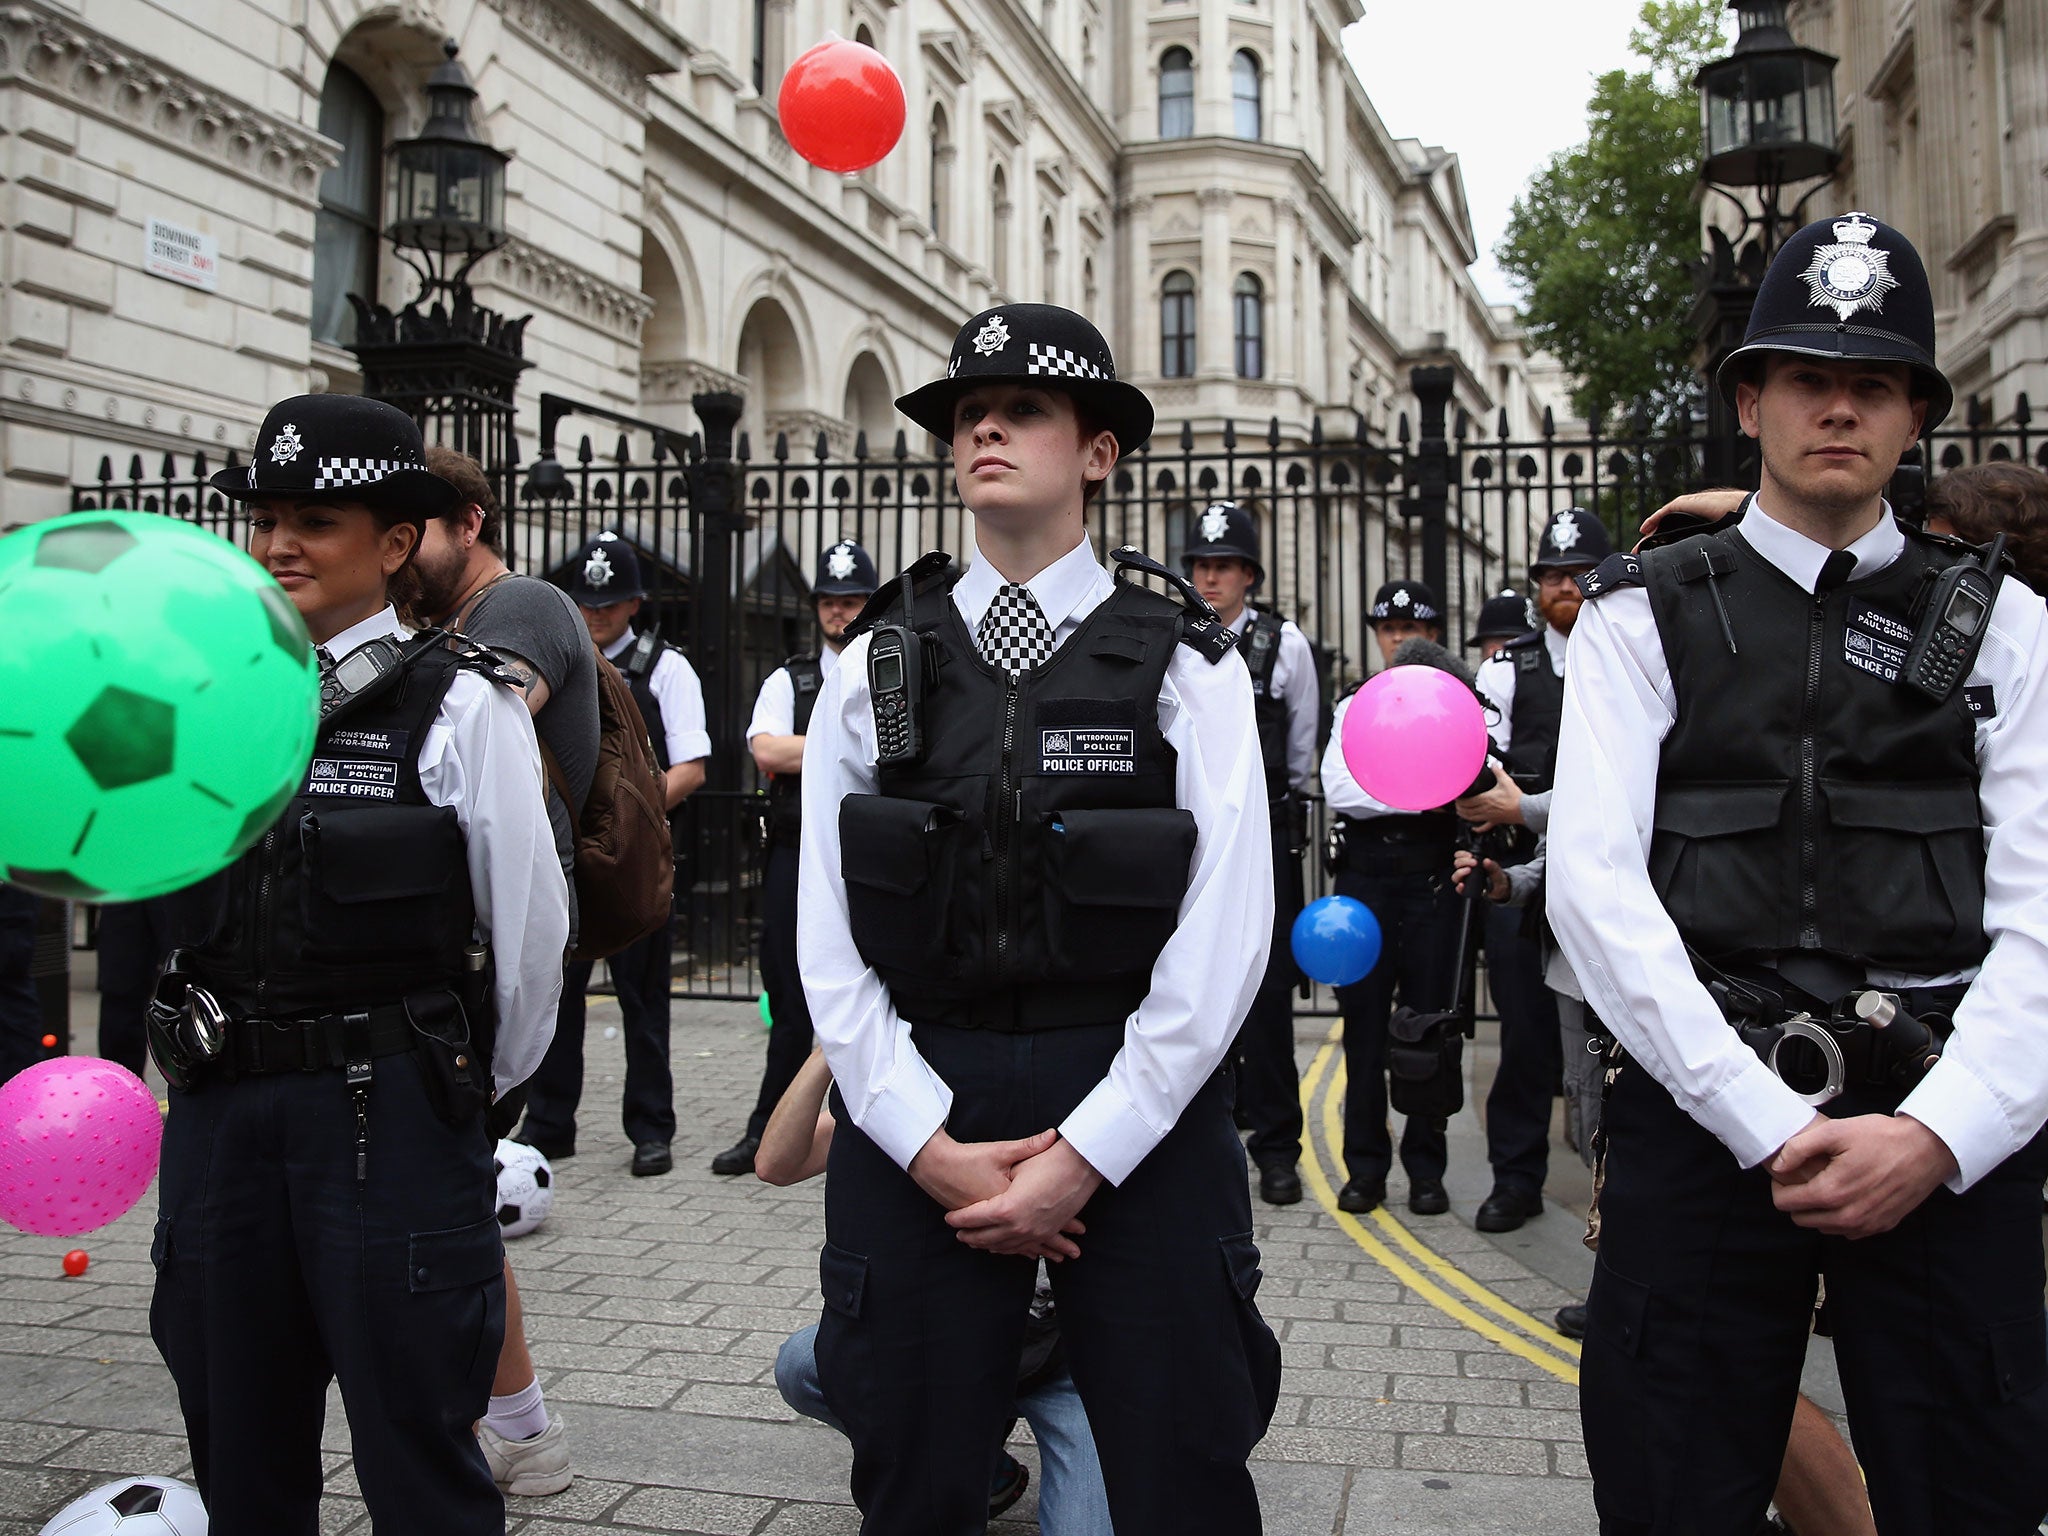 Anti-austerity protesters throw balls towards Downing Street